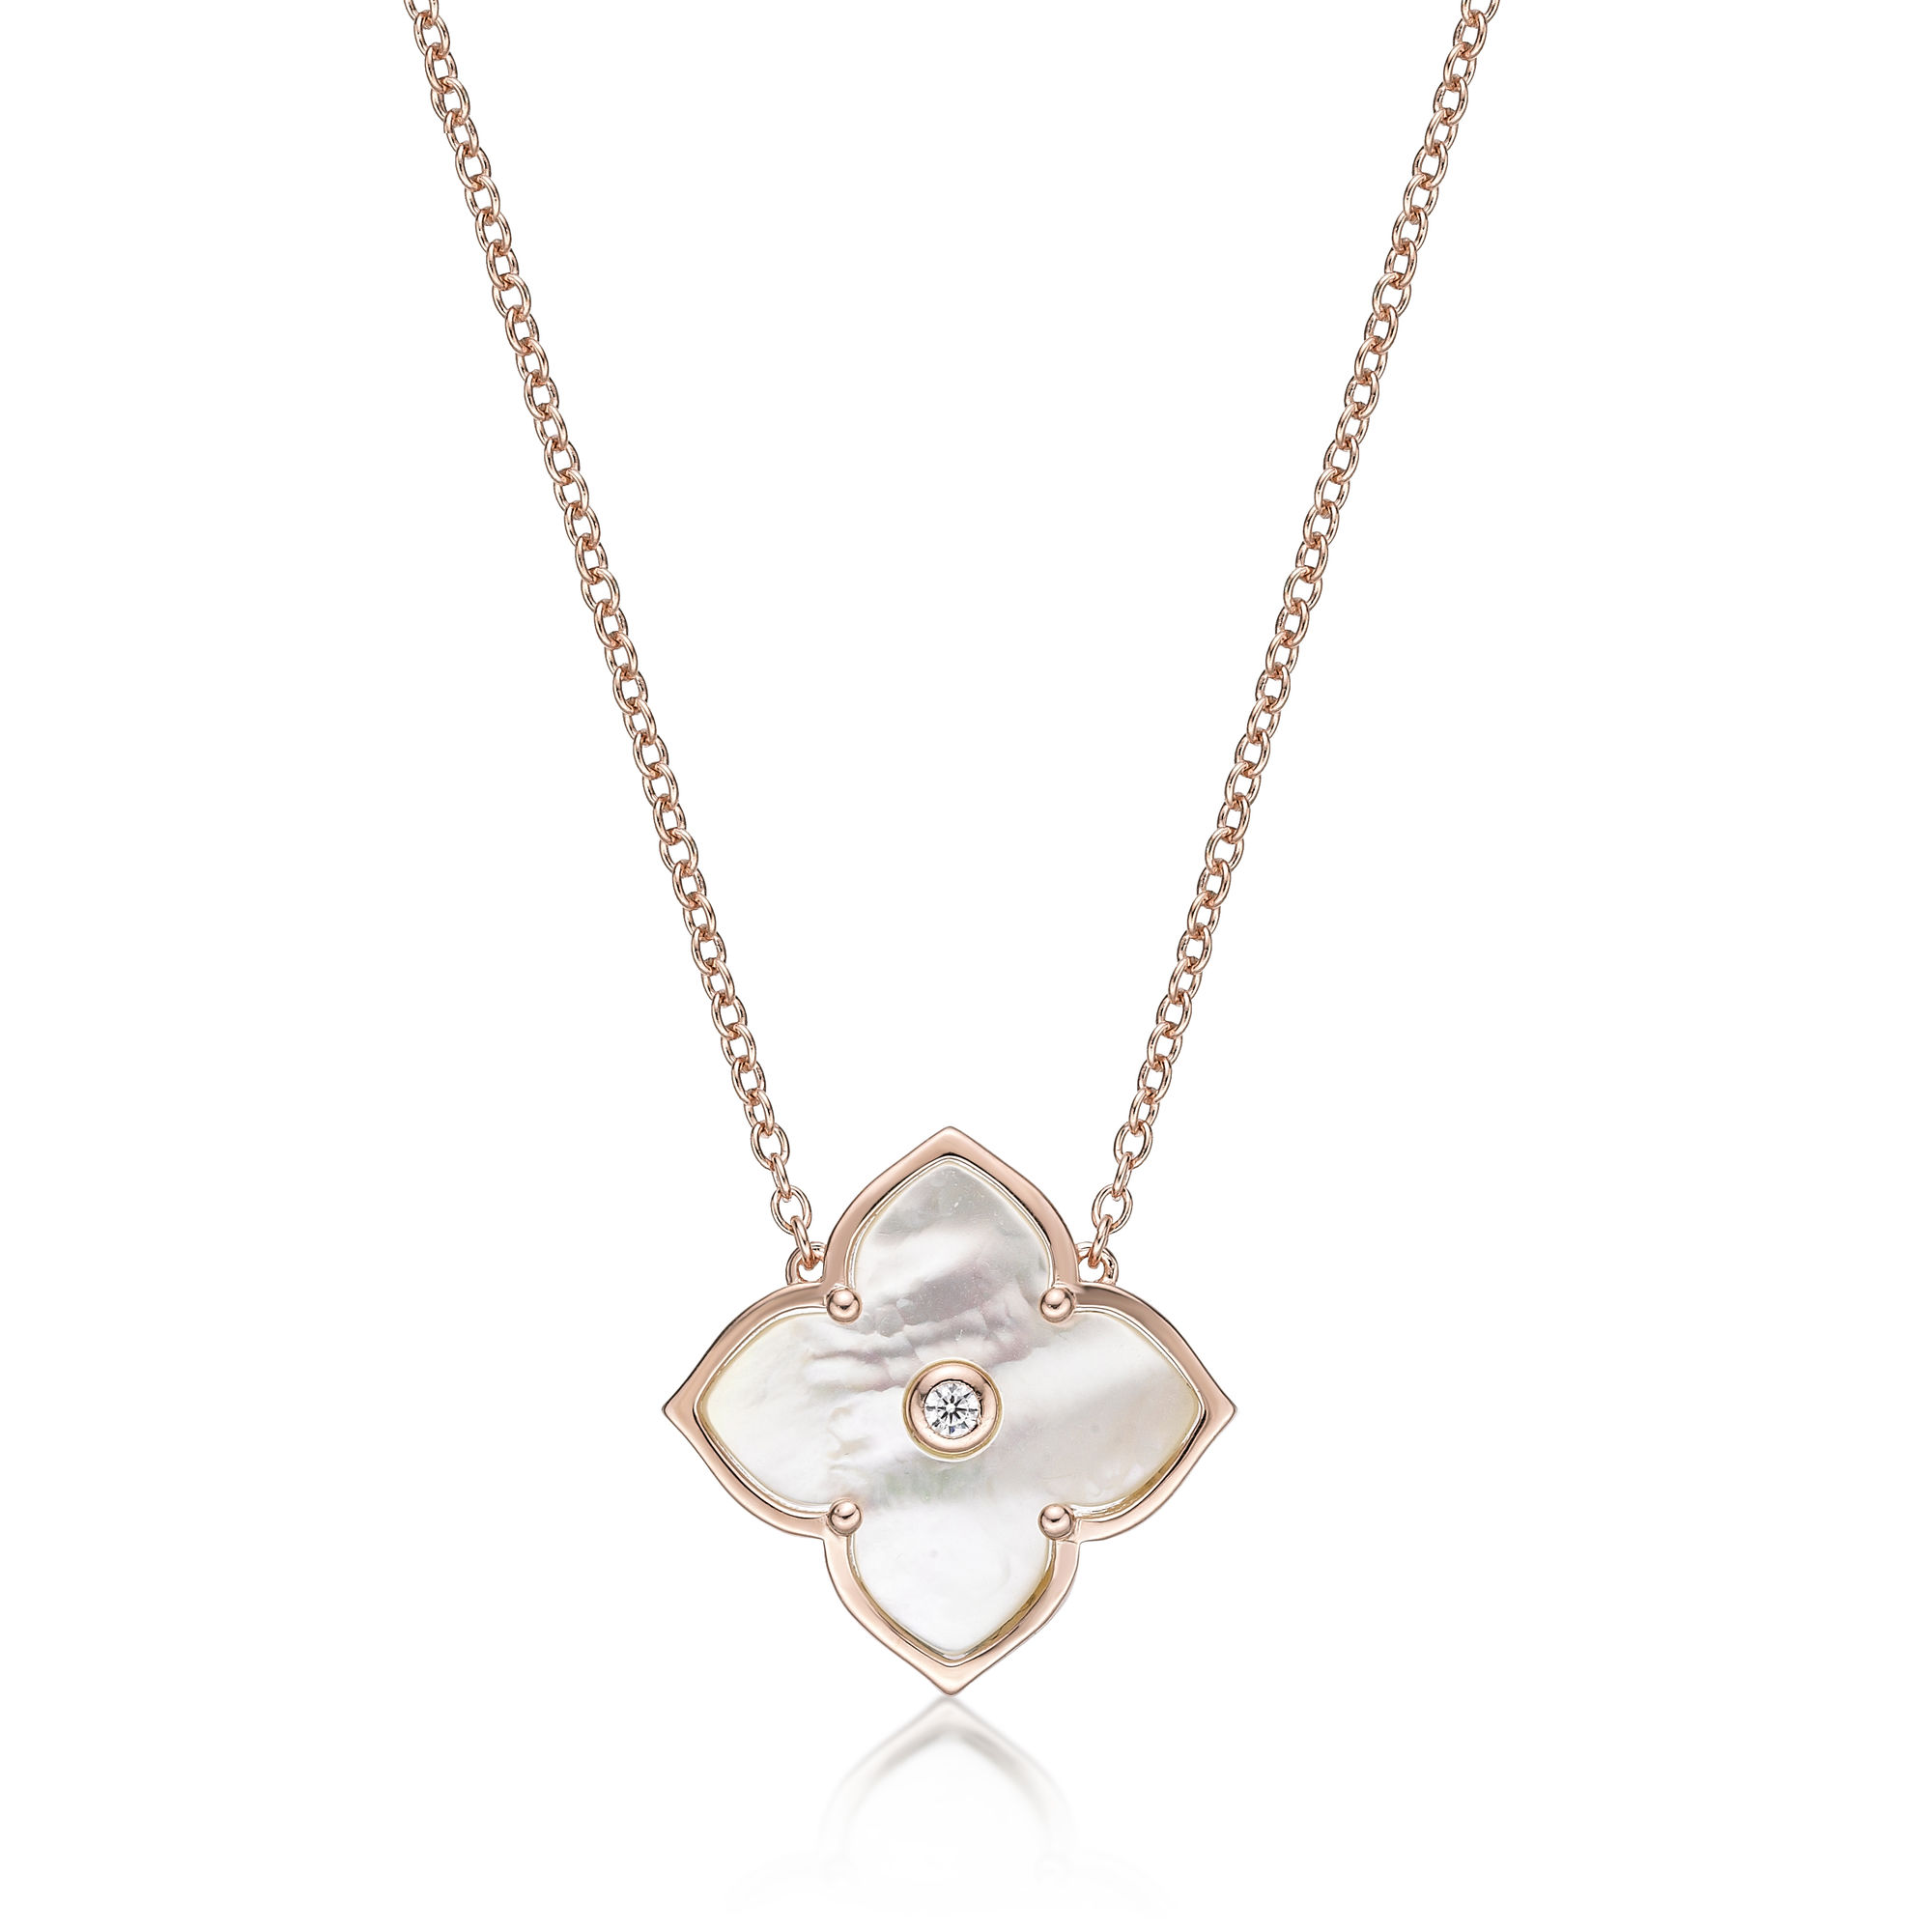 Lavari Jewelers Women's Mother of Pearl Flower Pendant with Lobster Clasp Necklace, 925 Pink Sterling Silver, Cubic Zirconia, 16-18 Inches